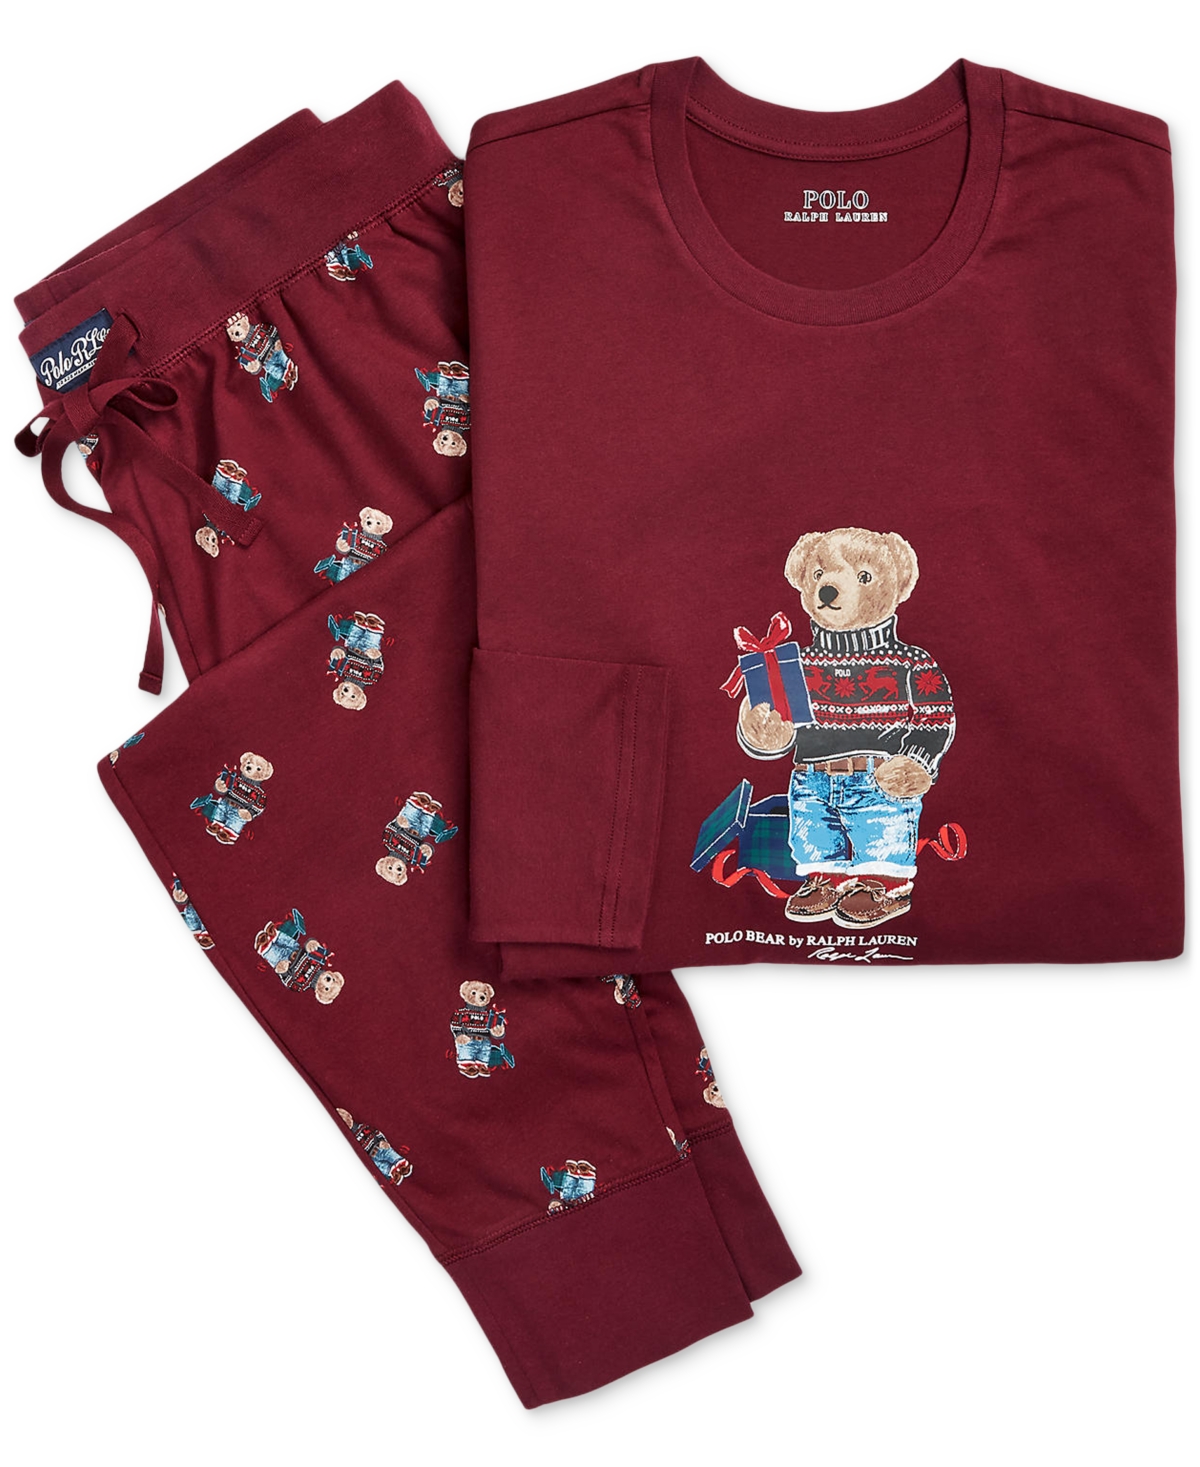 Polo Ralph Lauren Men's 2-pc. Cotton Polo Bear Pajamas Set In Classic Wine With Holiday Bear